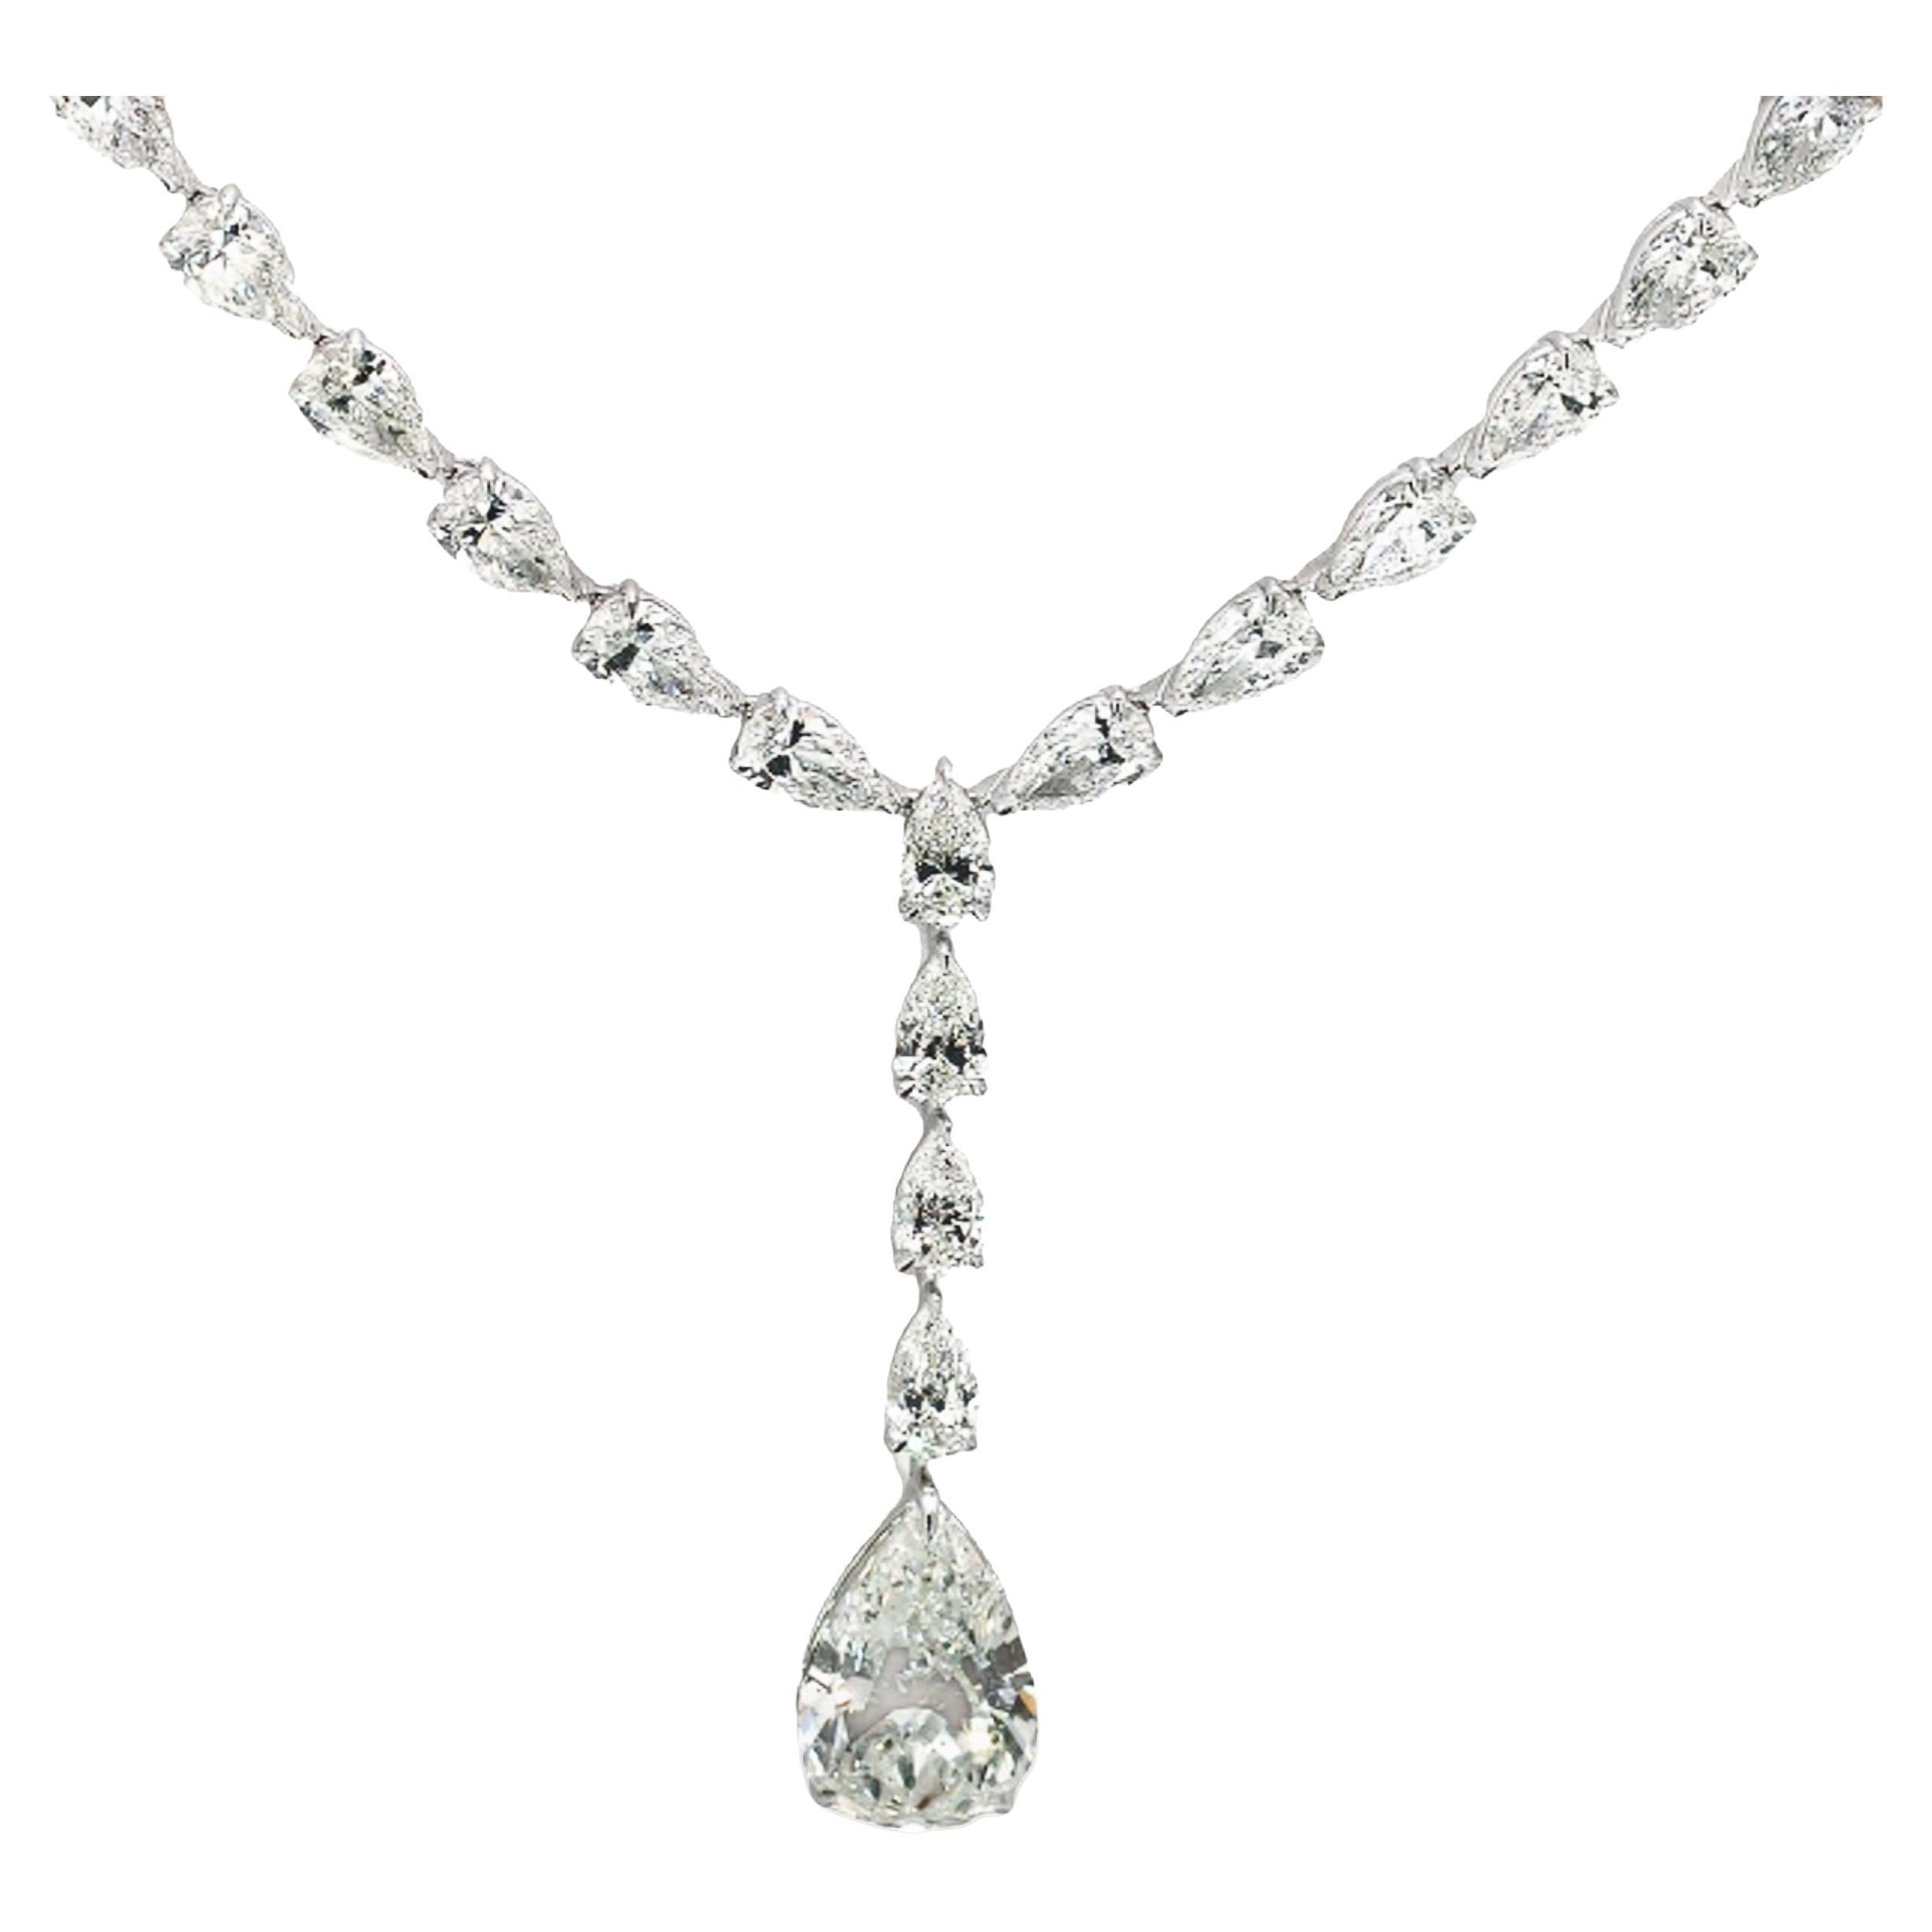 Dangling Tennis Necklace with Pear Shape Diamonds.  D36.13ct.t.w. For Sale